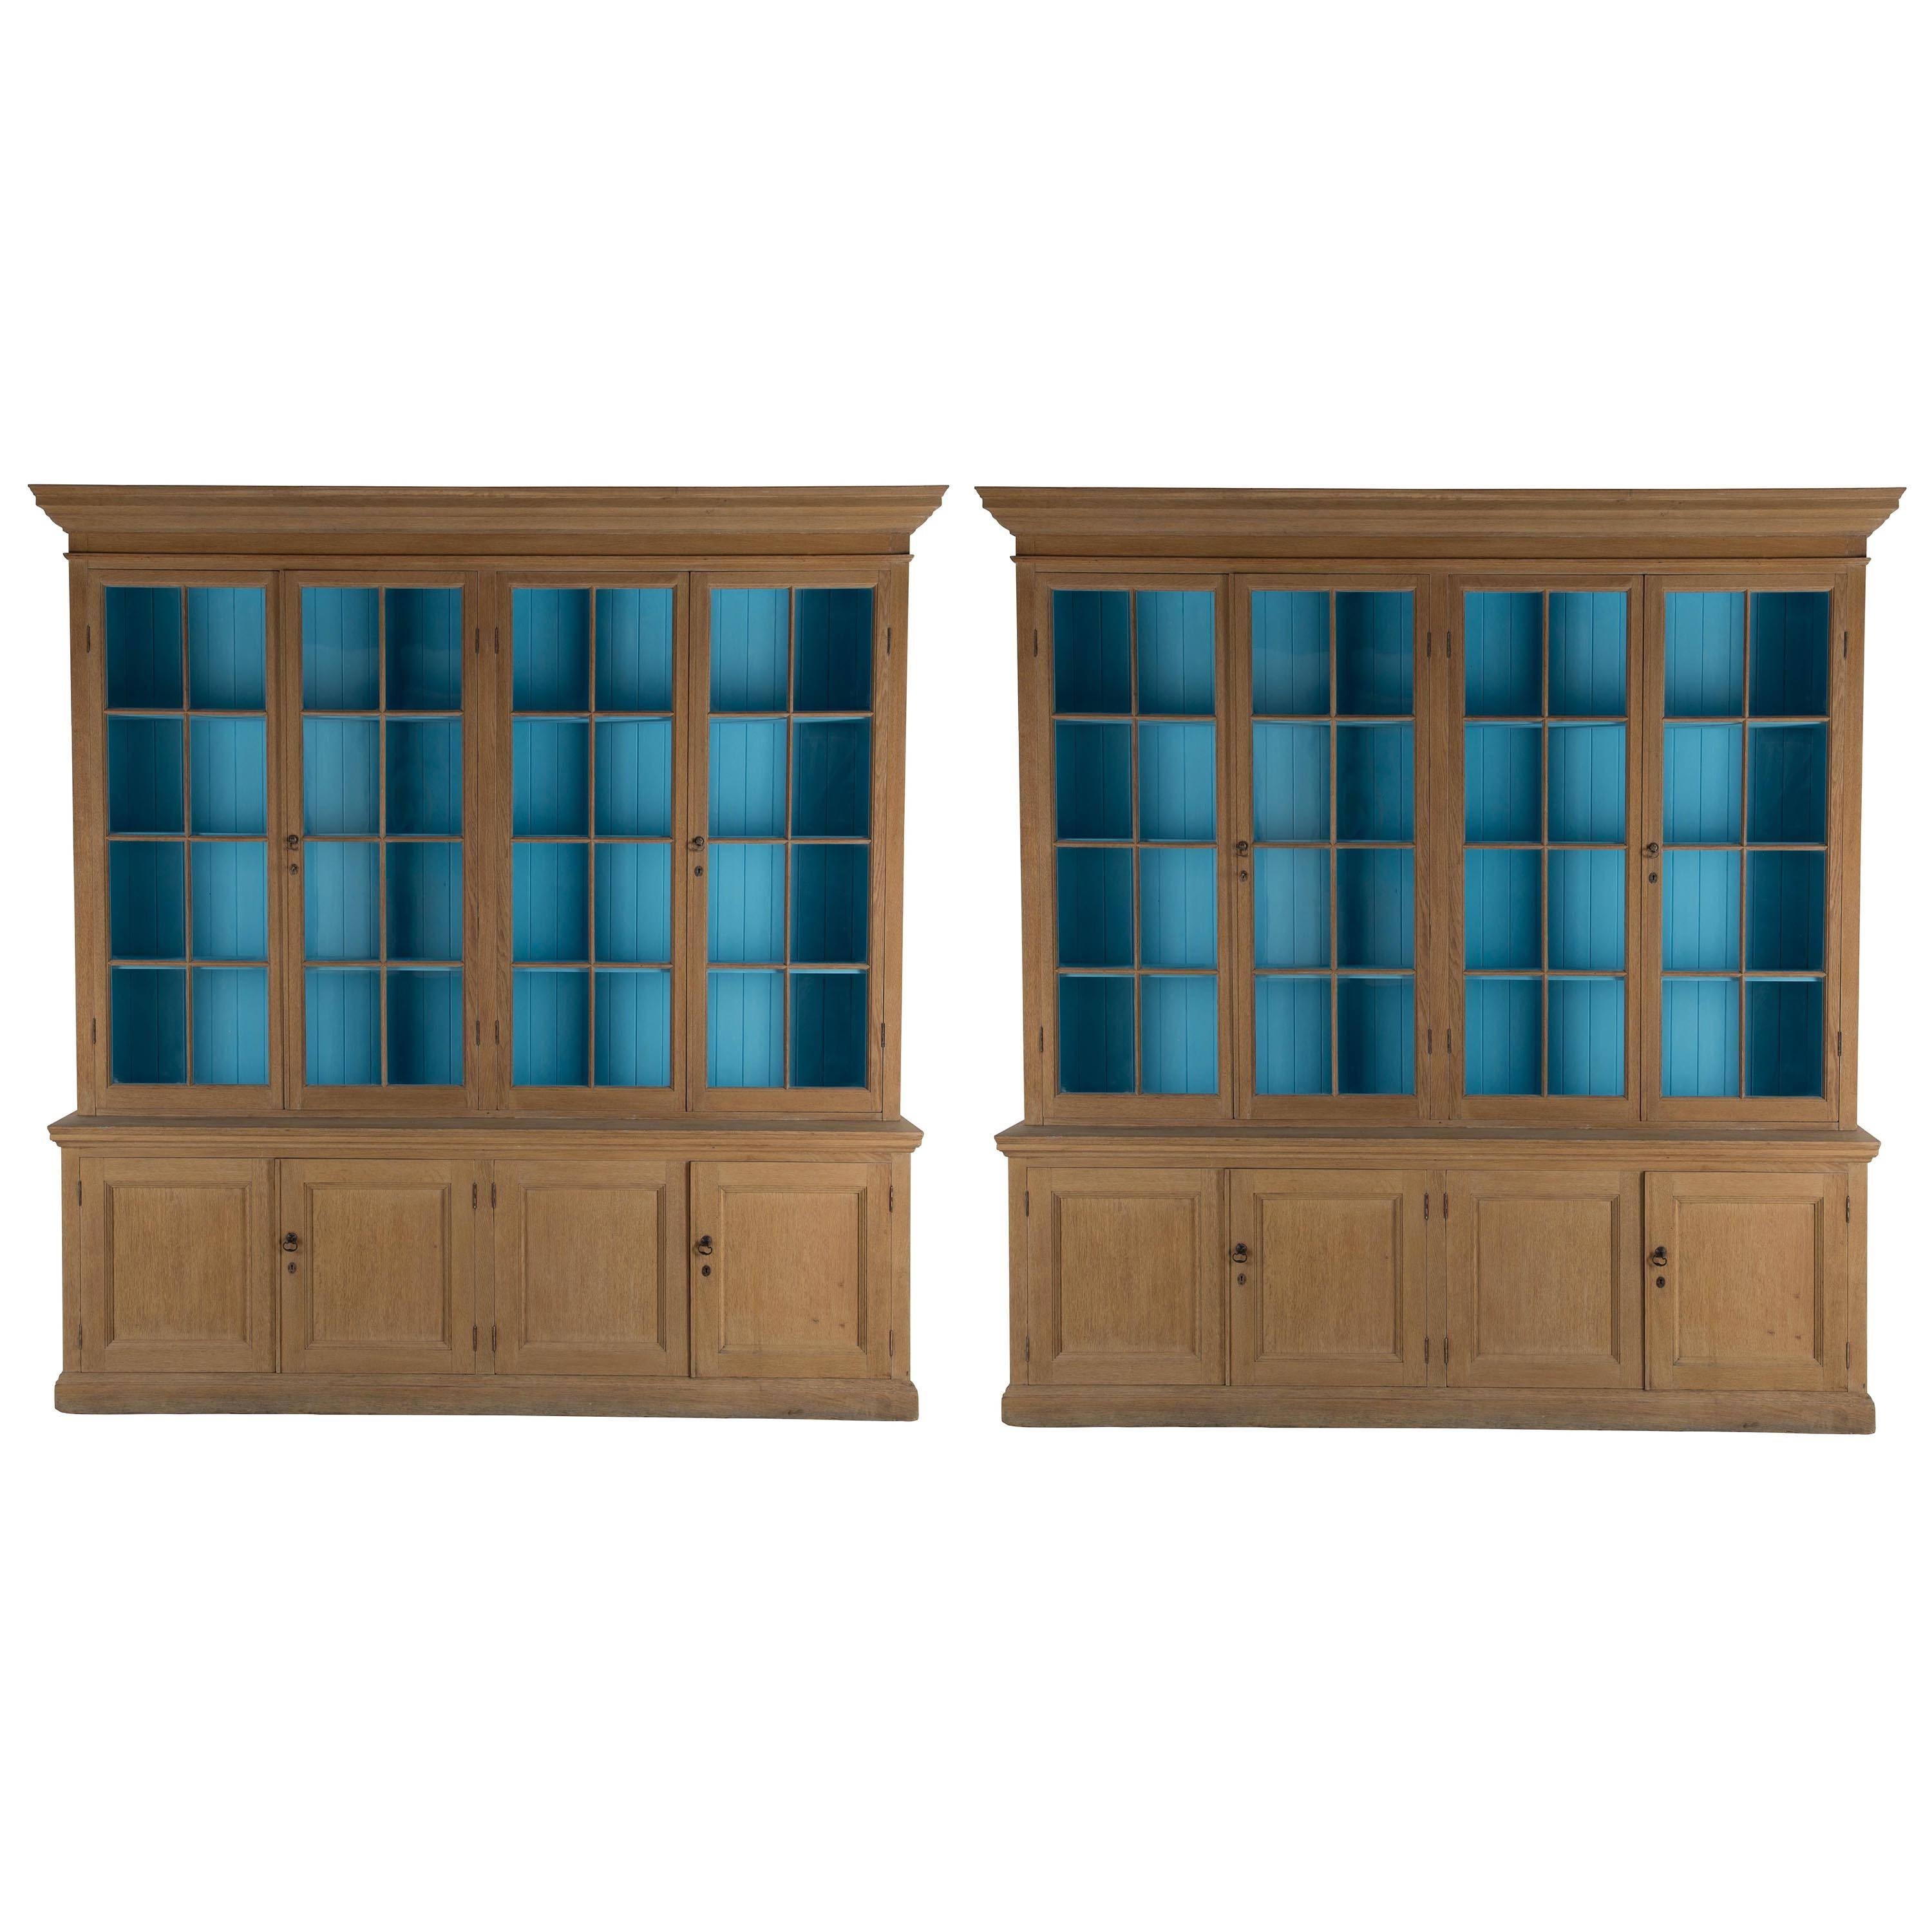 Pair of English Oak Bookcases